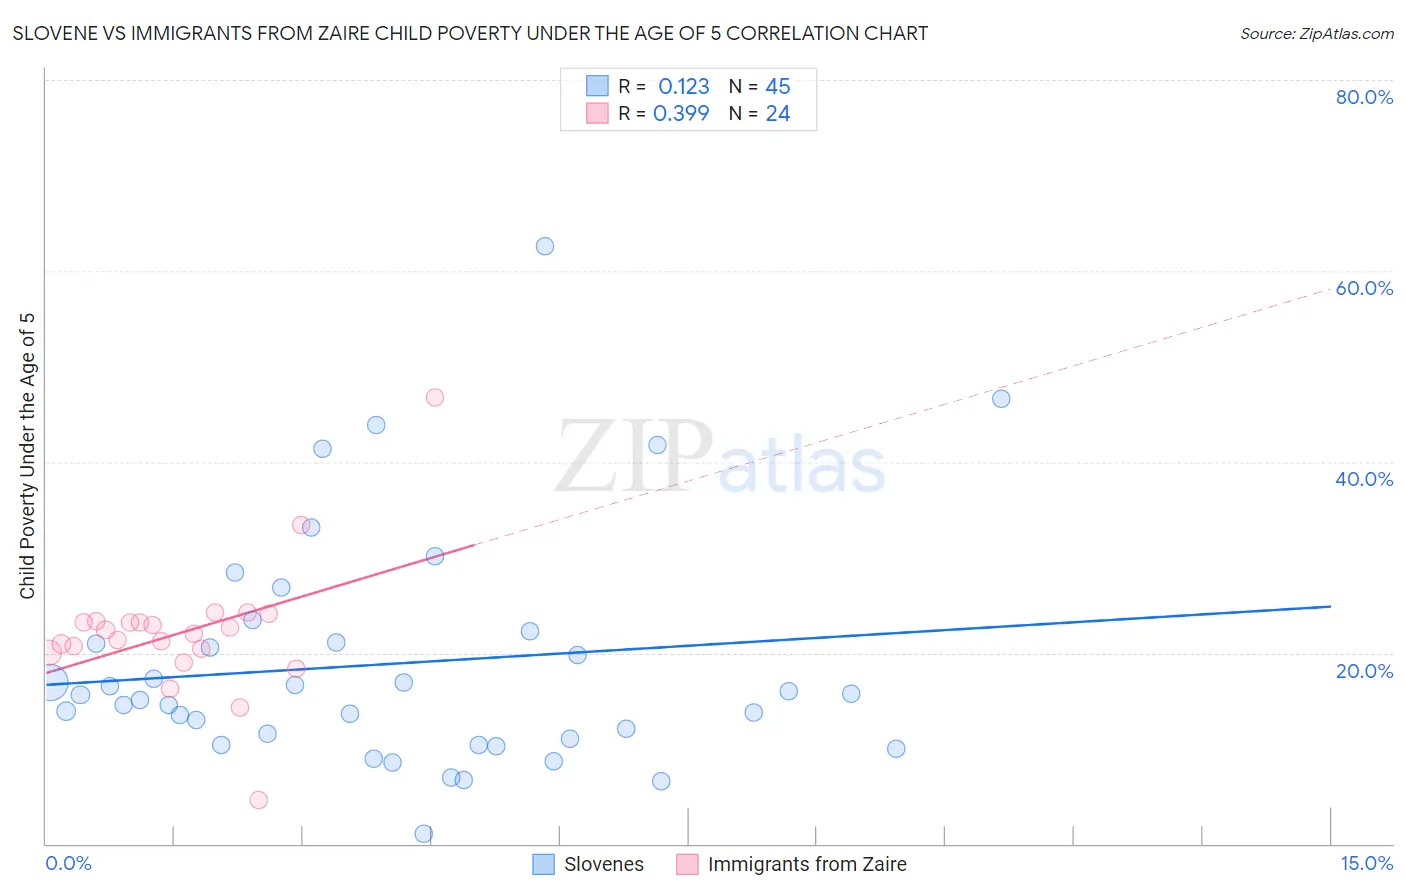 Slovene vs Immigrants from Zaire Child Poverty Under the Age of 5